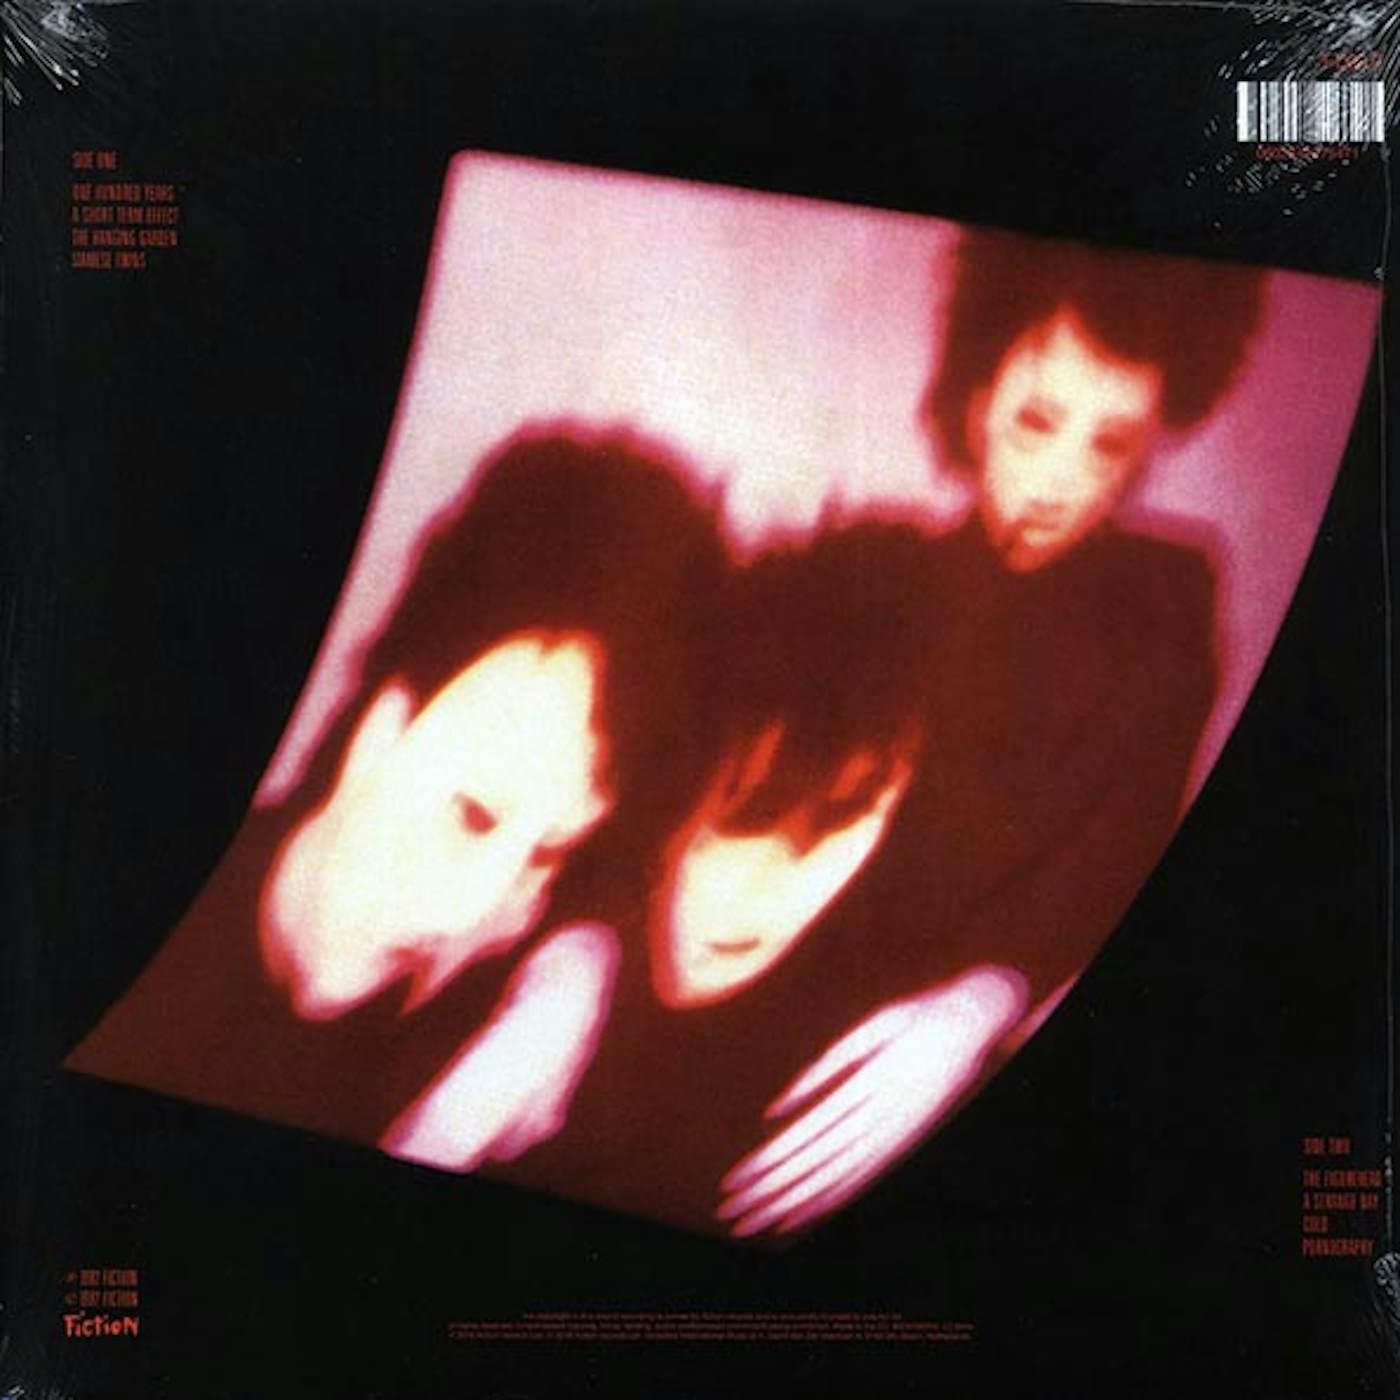 The Cure  LP -  Pornography (incl. mp3) (180g) (remastered) (Vinyl)